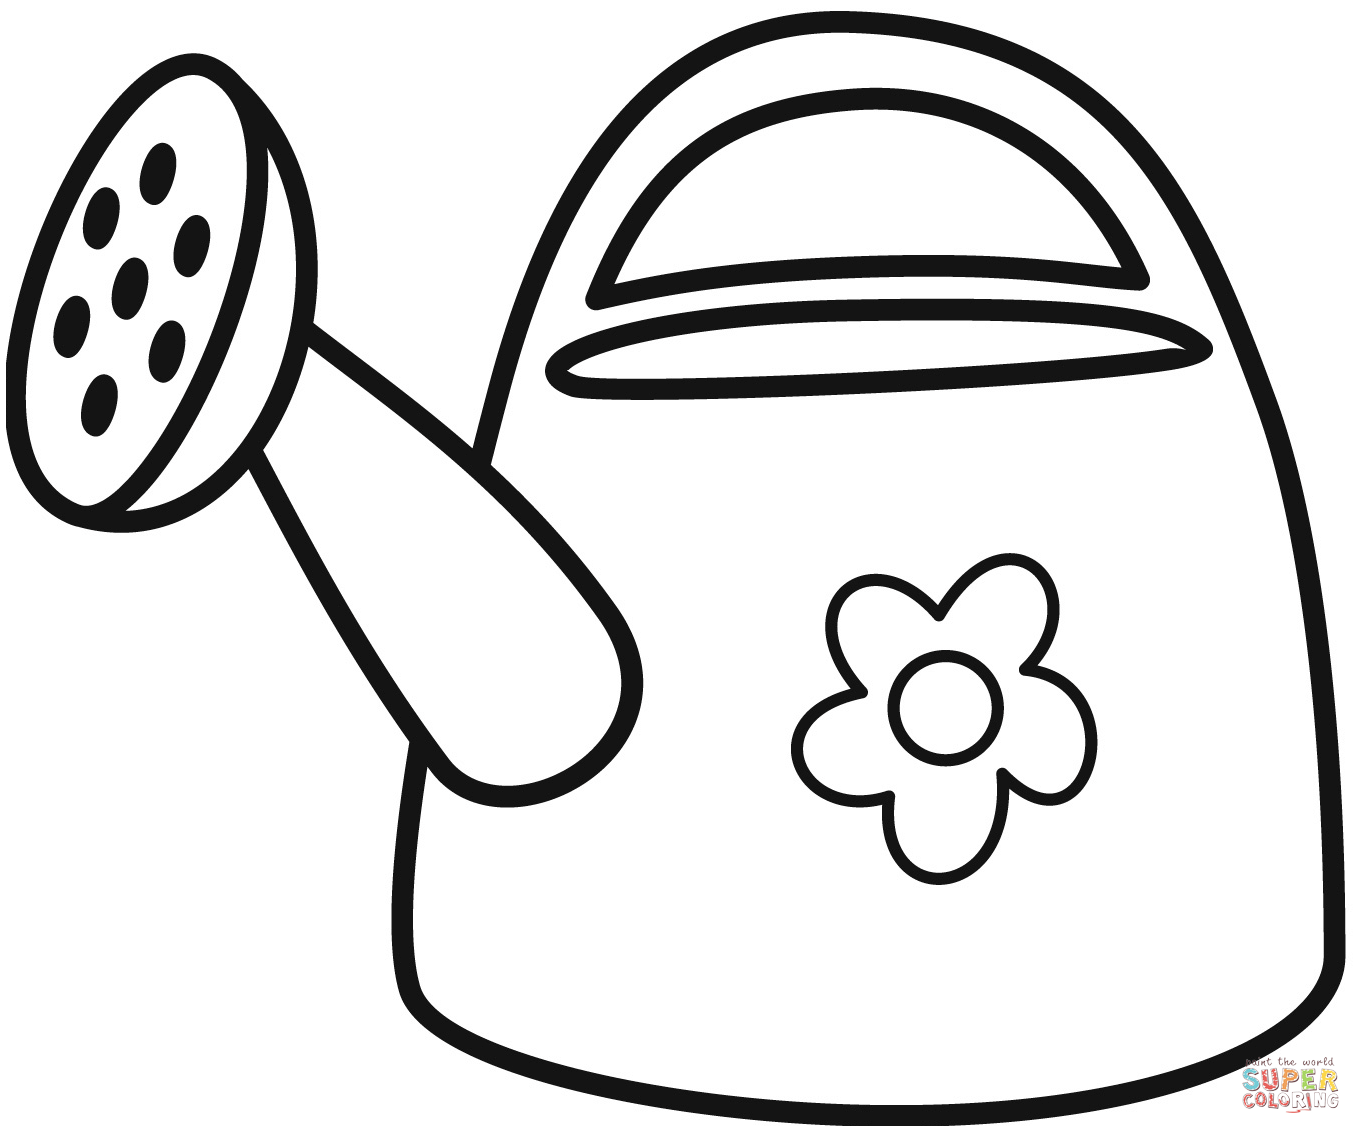 Watering can coloring page free printable coloring pages